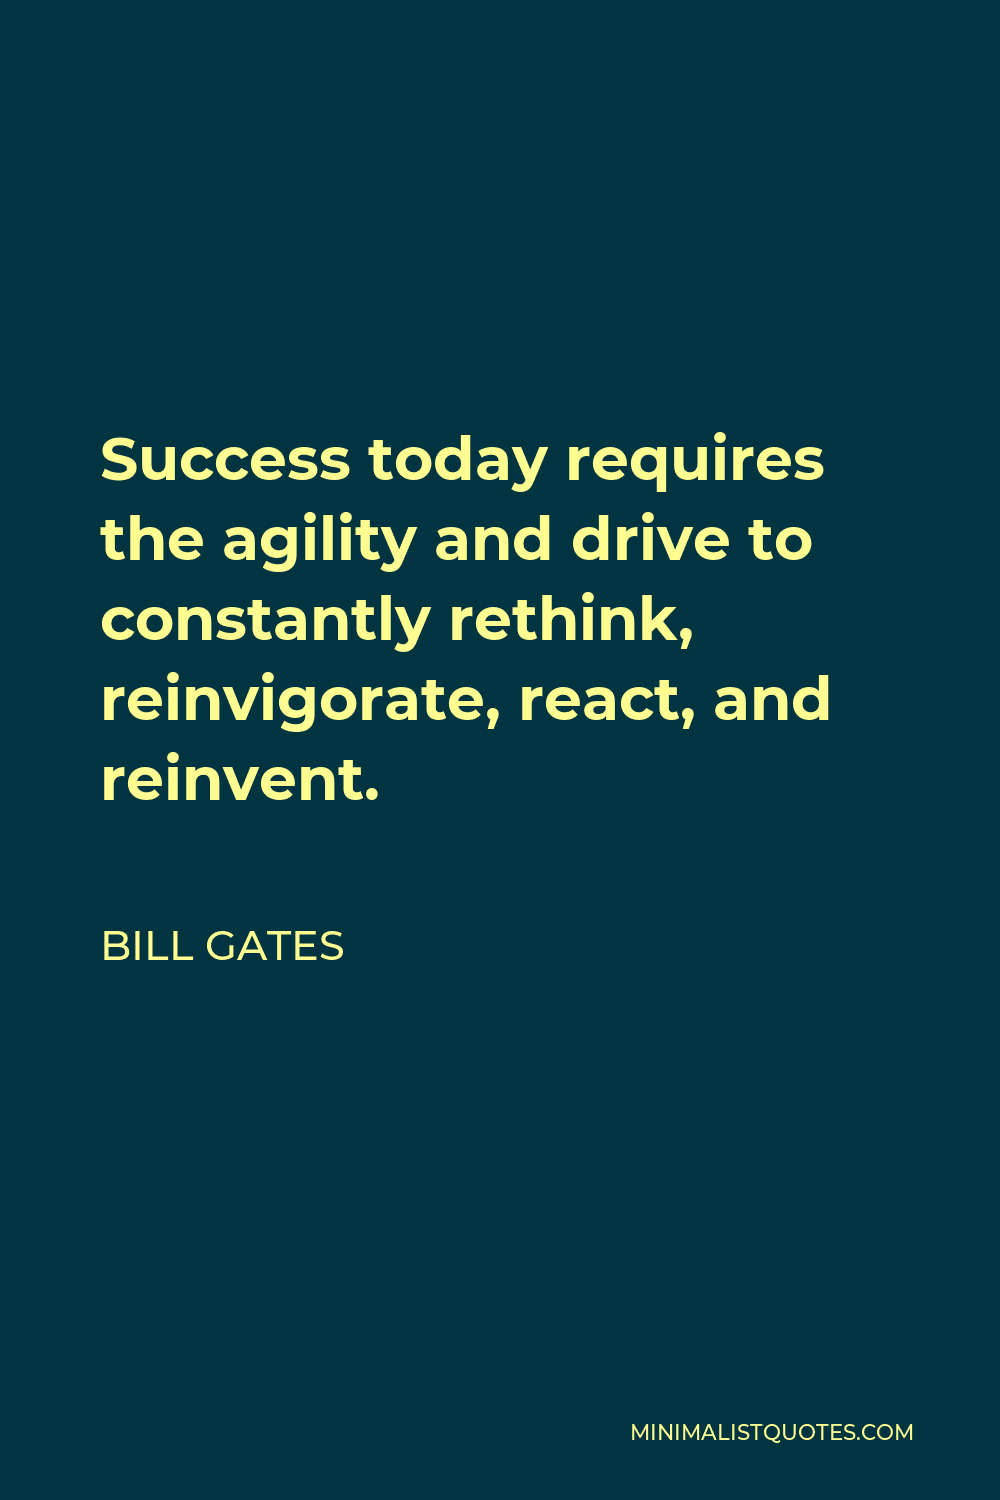 Bill Gates Quote - Success today requires the agility and drive to constantly rethink, reinvigorate, react, and reinvent.